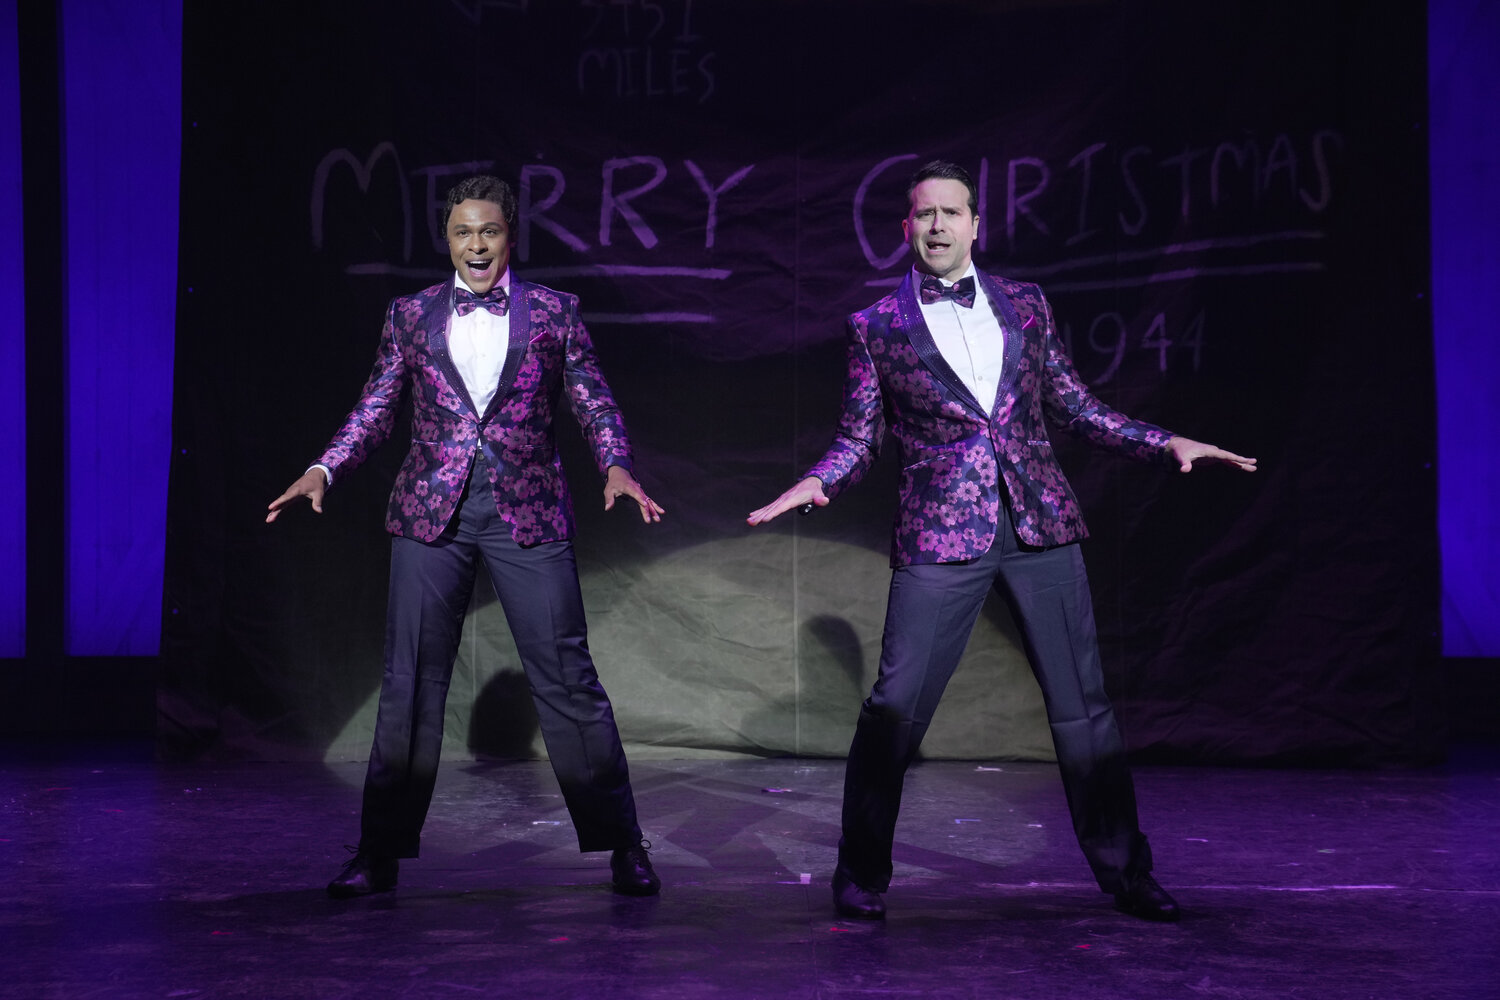 Jarran Muse, as Phil Davis, and Jeremiah James, as Bob Wallace in “Irving Berlin’s White Christmas” at Bucks County Playhouse through Dec. 31.